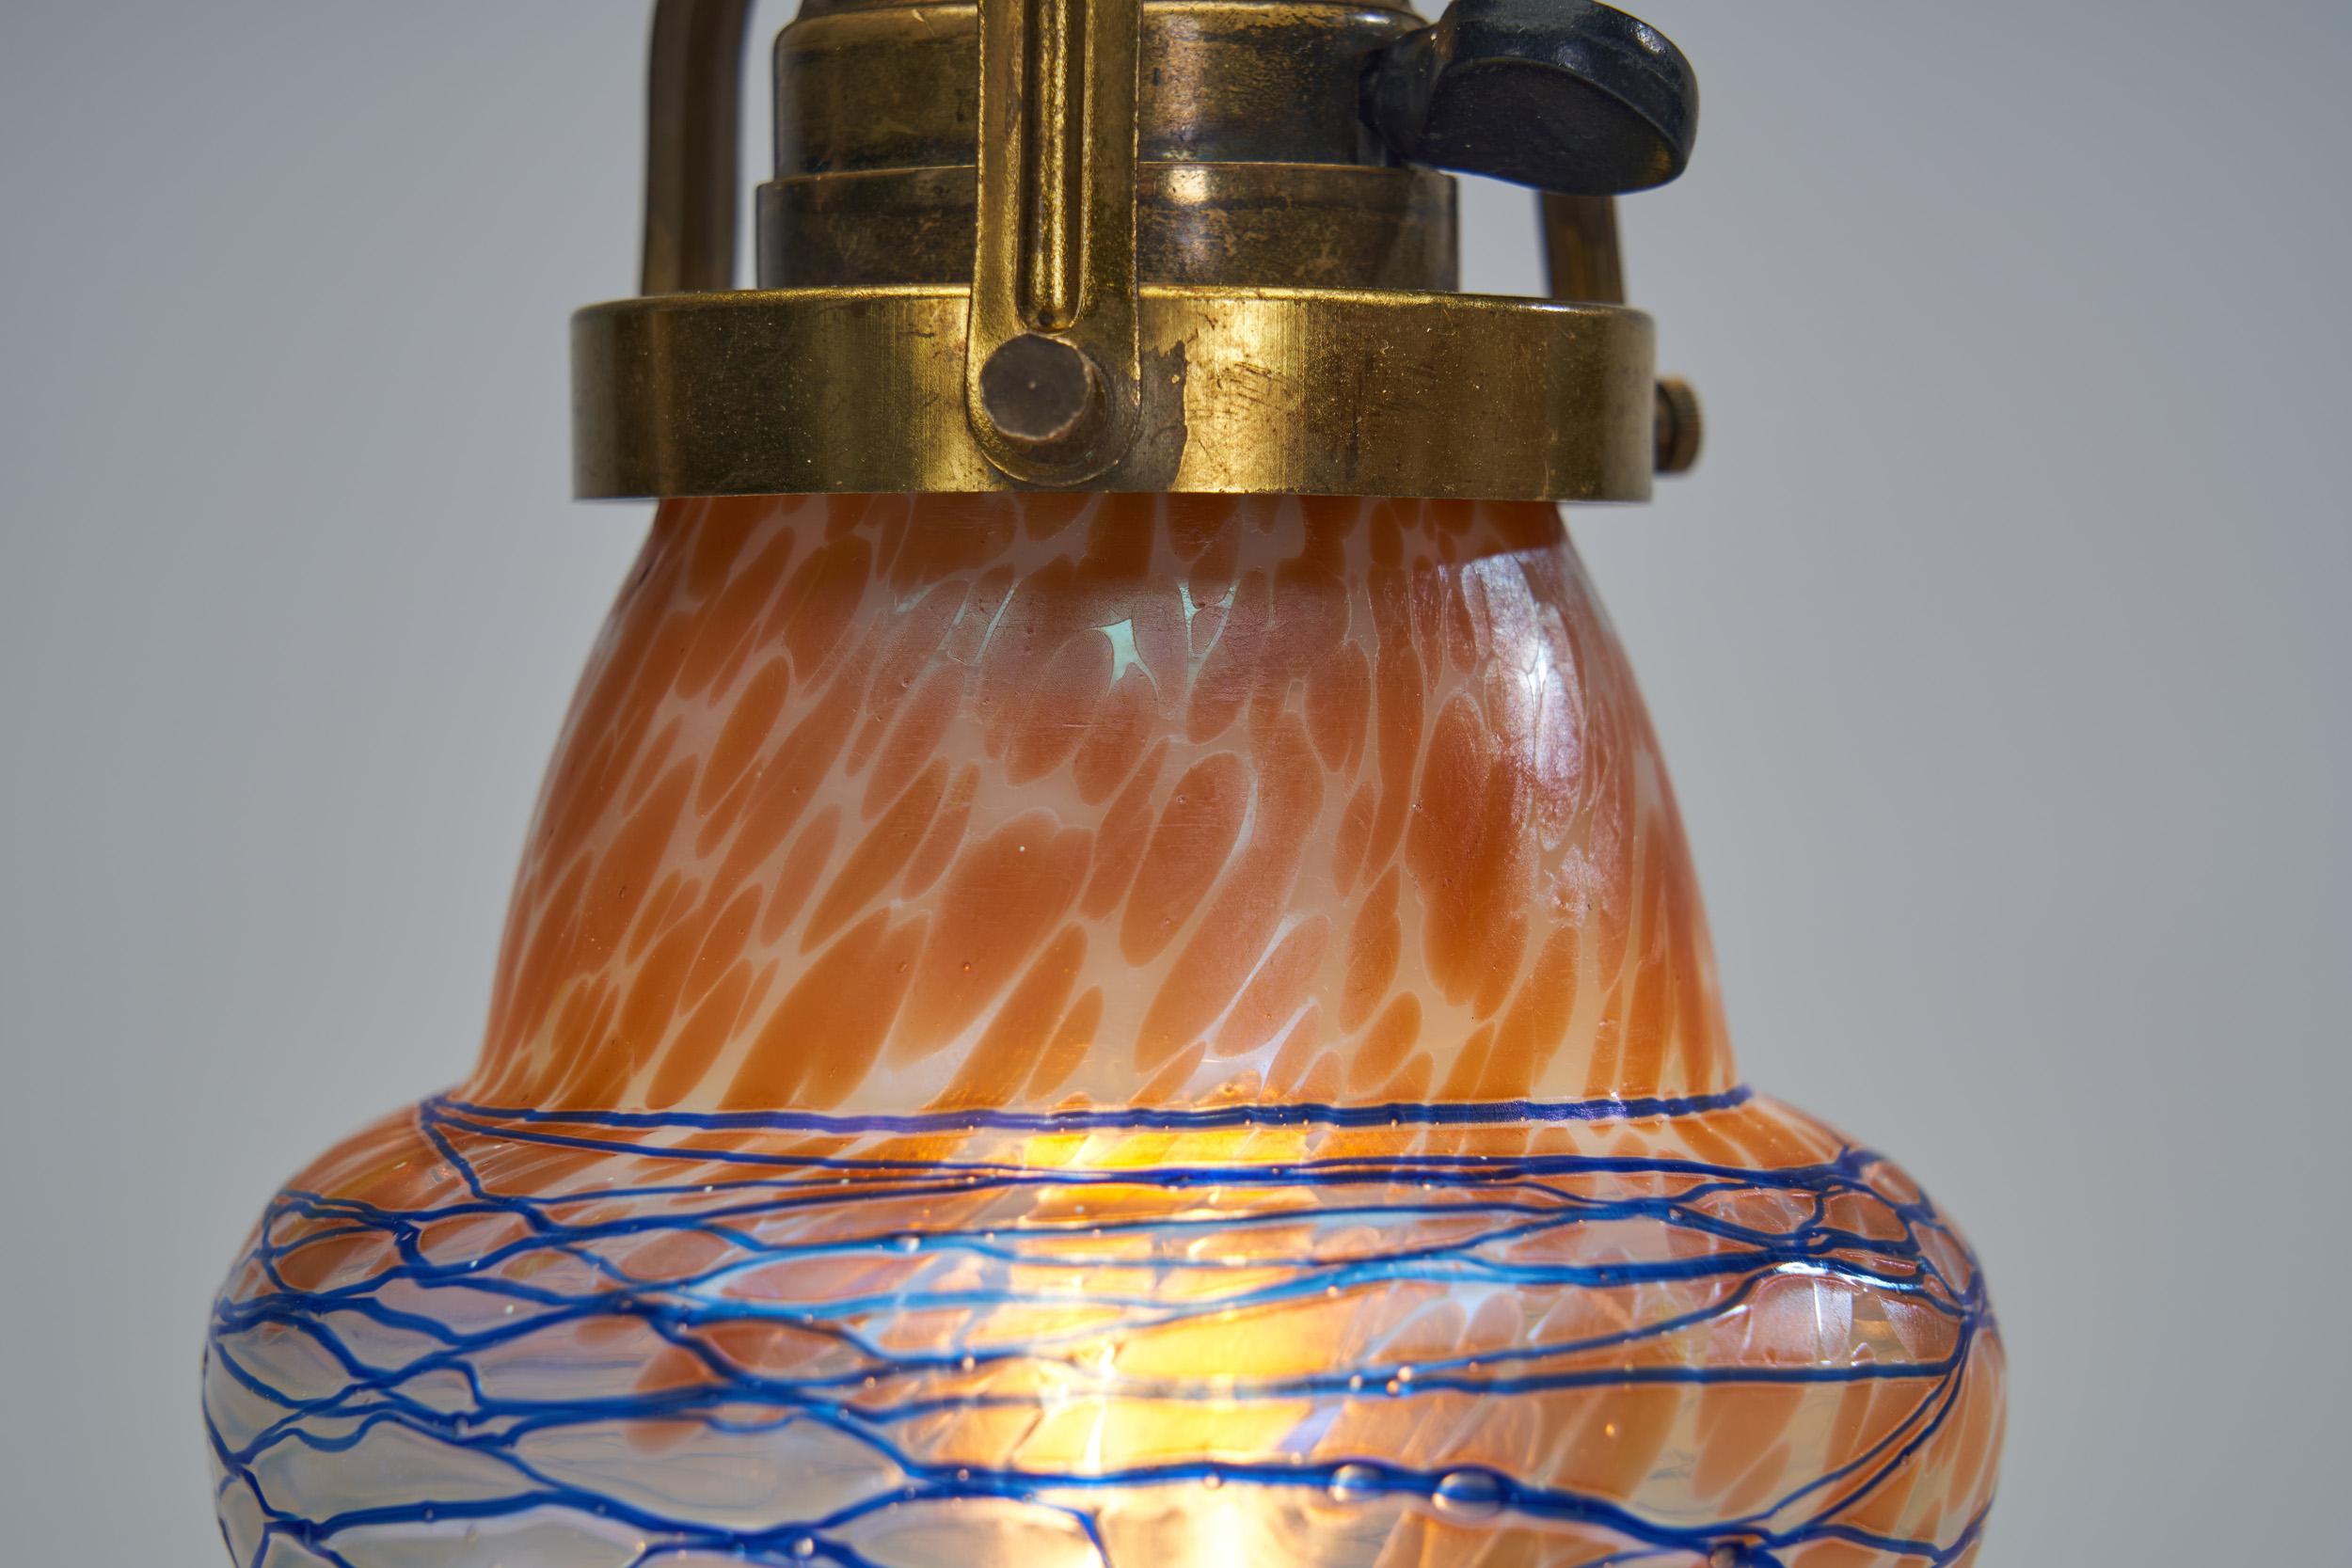 Brass Table Lamp with Iridescent Glass Shade, Europe, Early 20th Century For Sale 8